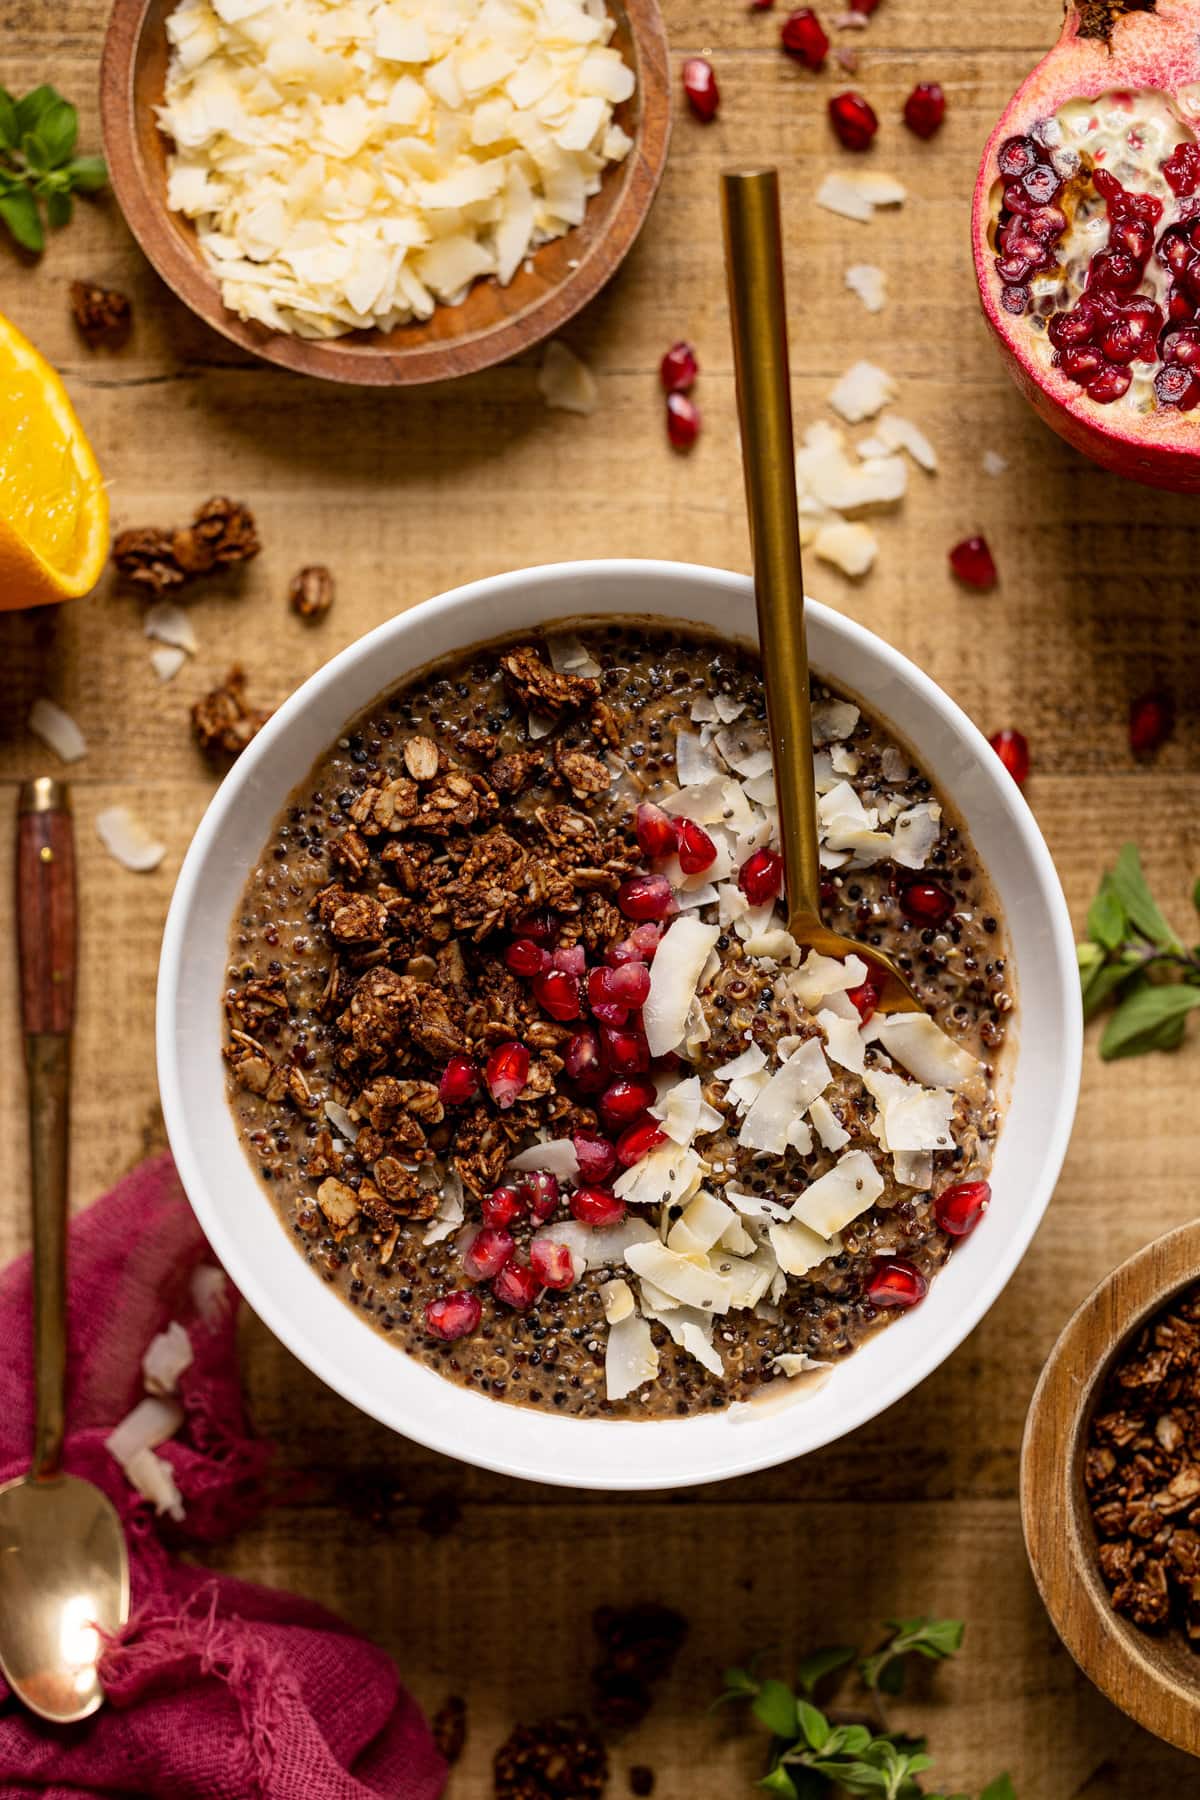 Spoon dipping into a Winter Quinoa Breakfast Bowl topped with pomegranate seeds